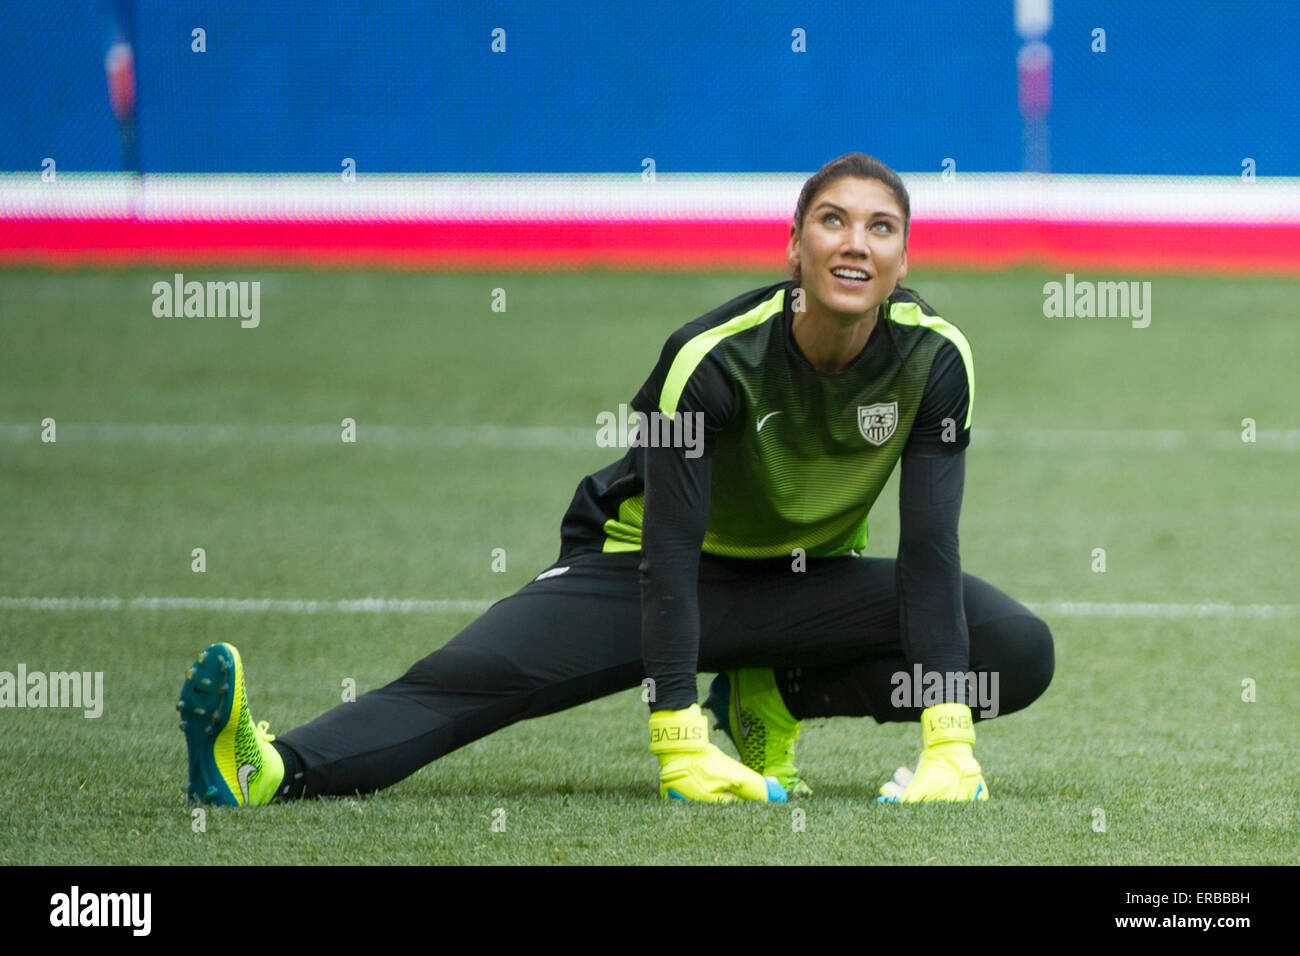 May 30 15 Usa Women S National Team Goalkeeper Hope Solo 1 Stretches Prior To The United States Womens Vs Korea Republic International Friendly At Redbull Arena In Harrison Nj The Us Women S